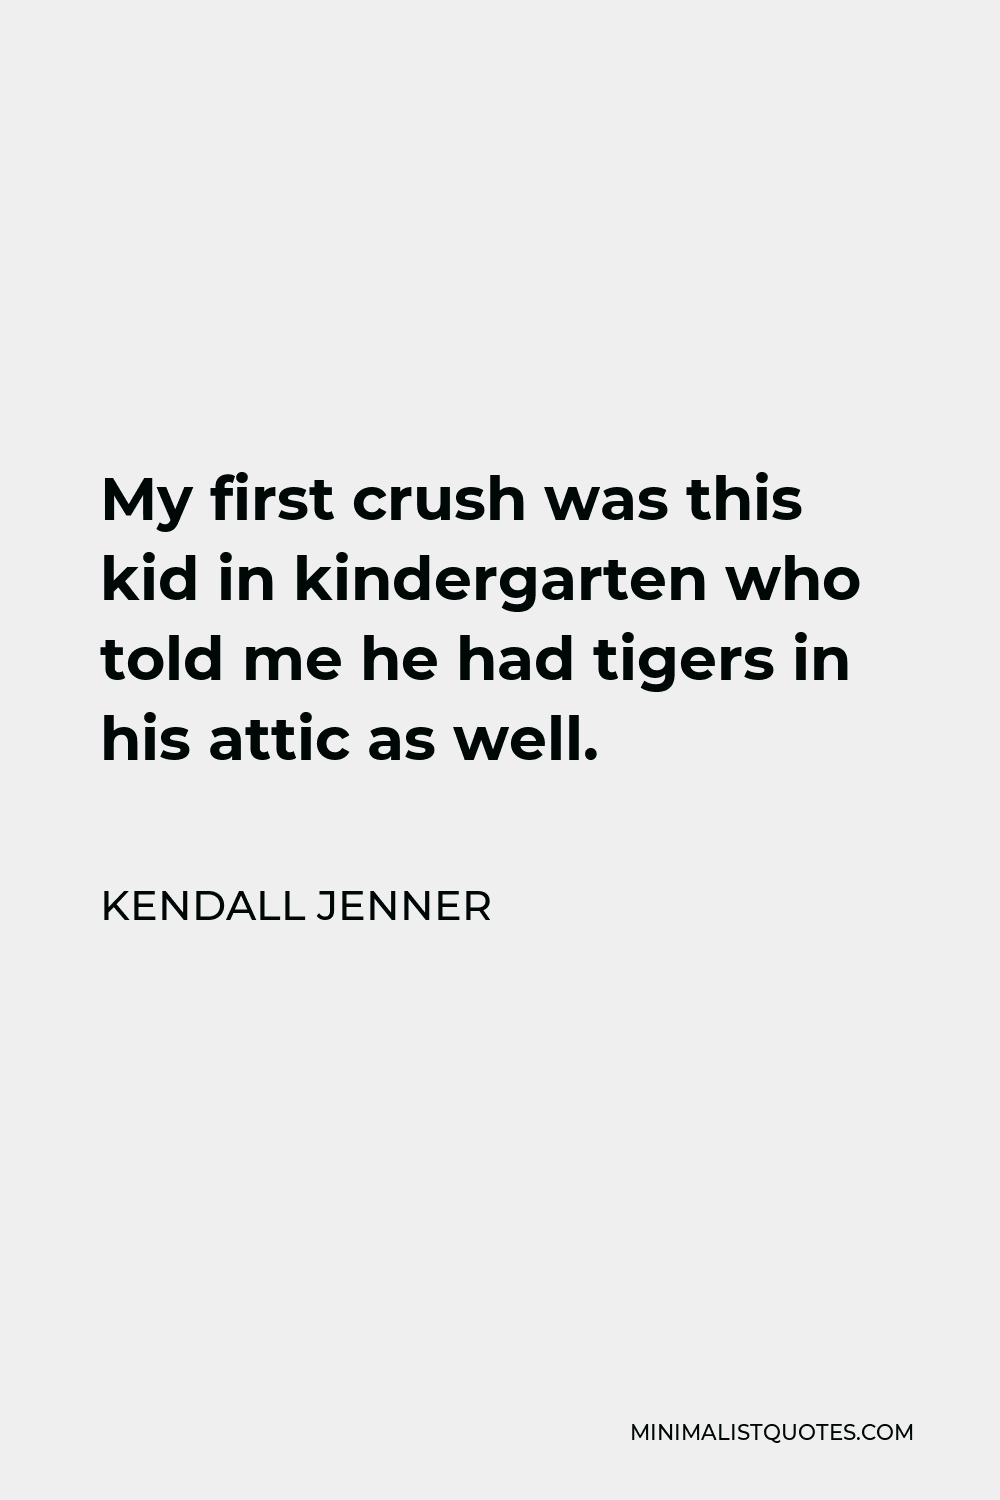 Kendall Jenner Quote - My first crush was this kid in kindergarten who told me he had tigers in his attic as well.